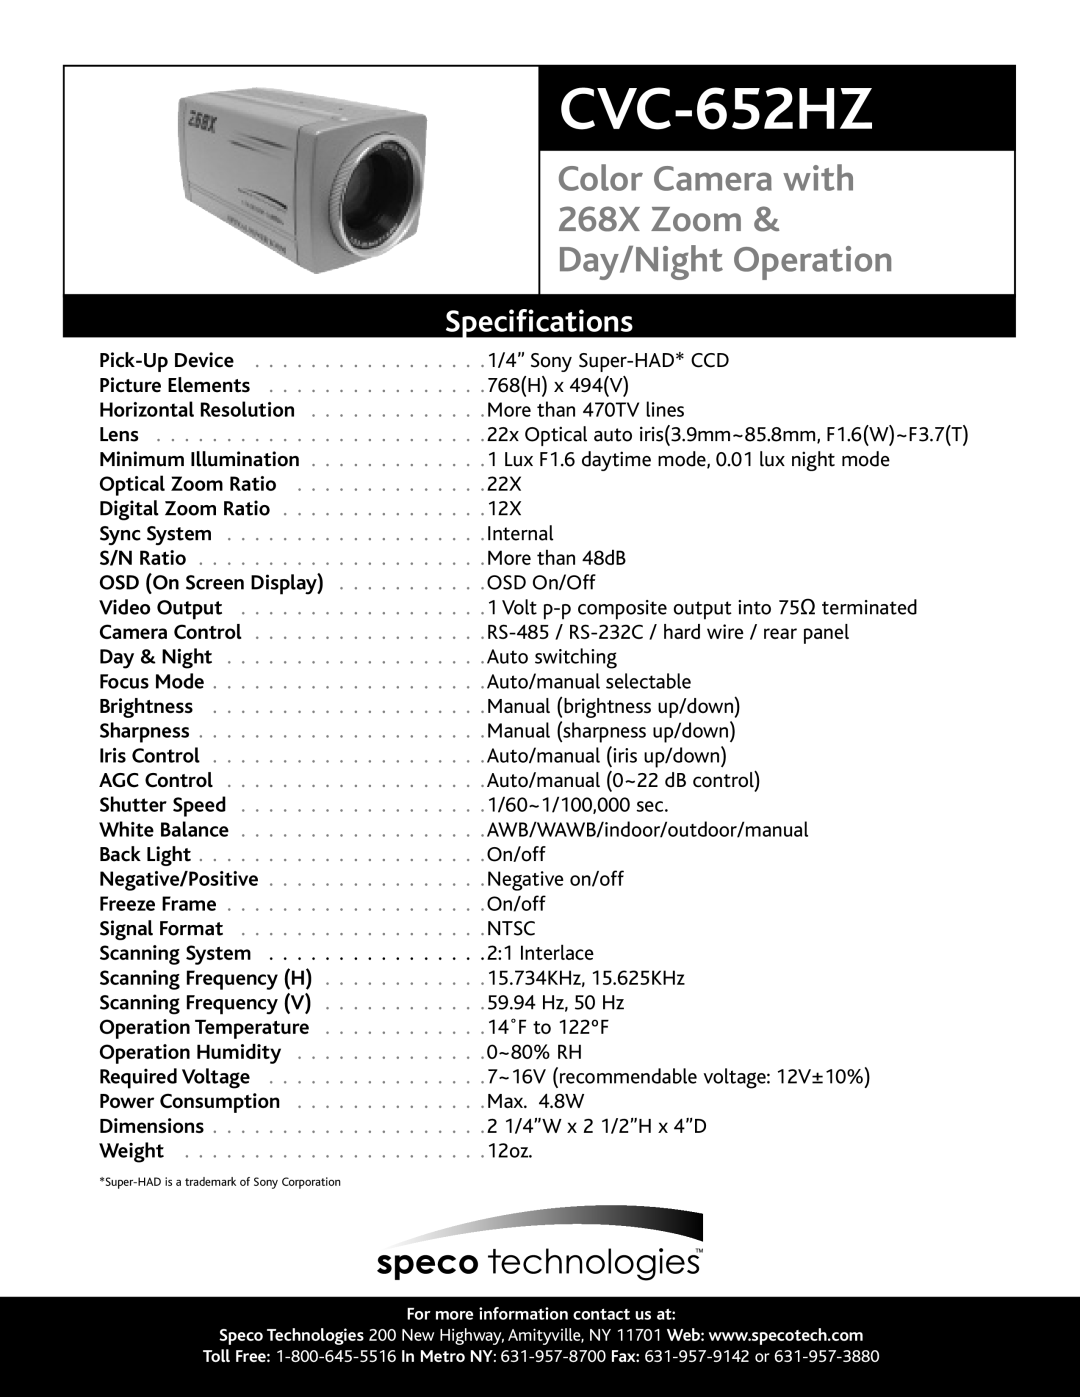 Speco Technologies CVC-652HZ specifications Color Camera with 268X Zoom & Day/Night Operation, Specifications 